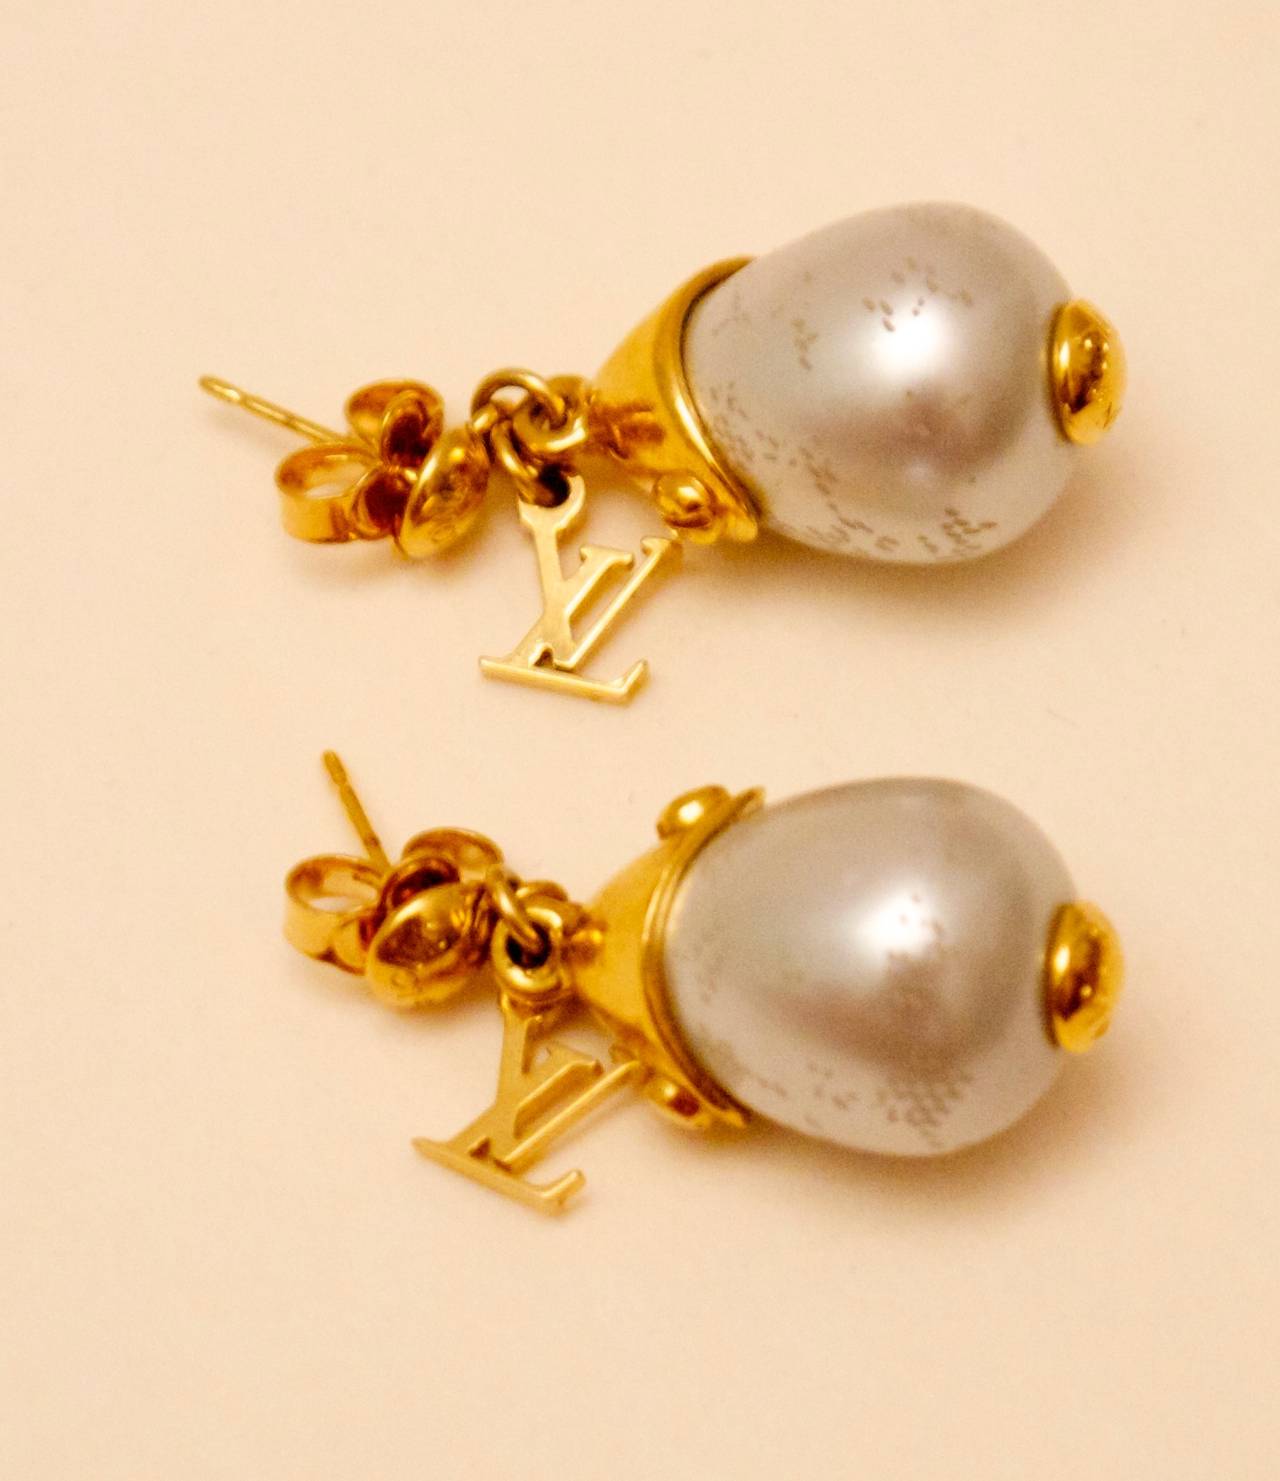 Louis Vuitton pearl tear drop shaped earrings. They also each have a gold tone charm on each with the iconic LV logo charm. Gorgeous pair of earrings that are versatile for both informal and formal occasions. Excellent piece to add to any personal